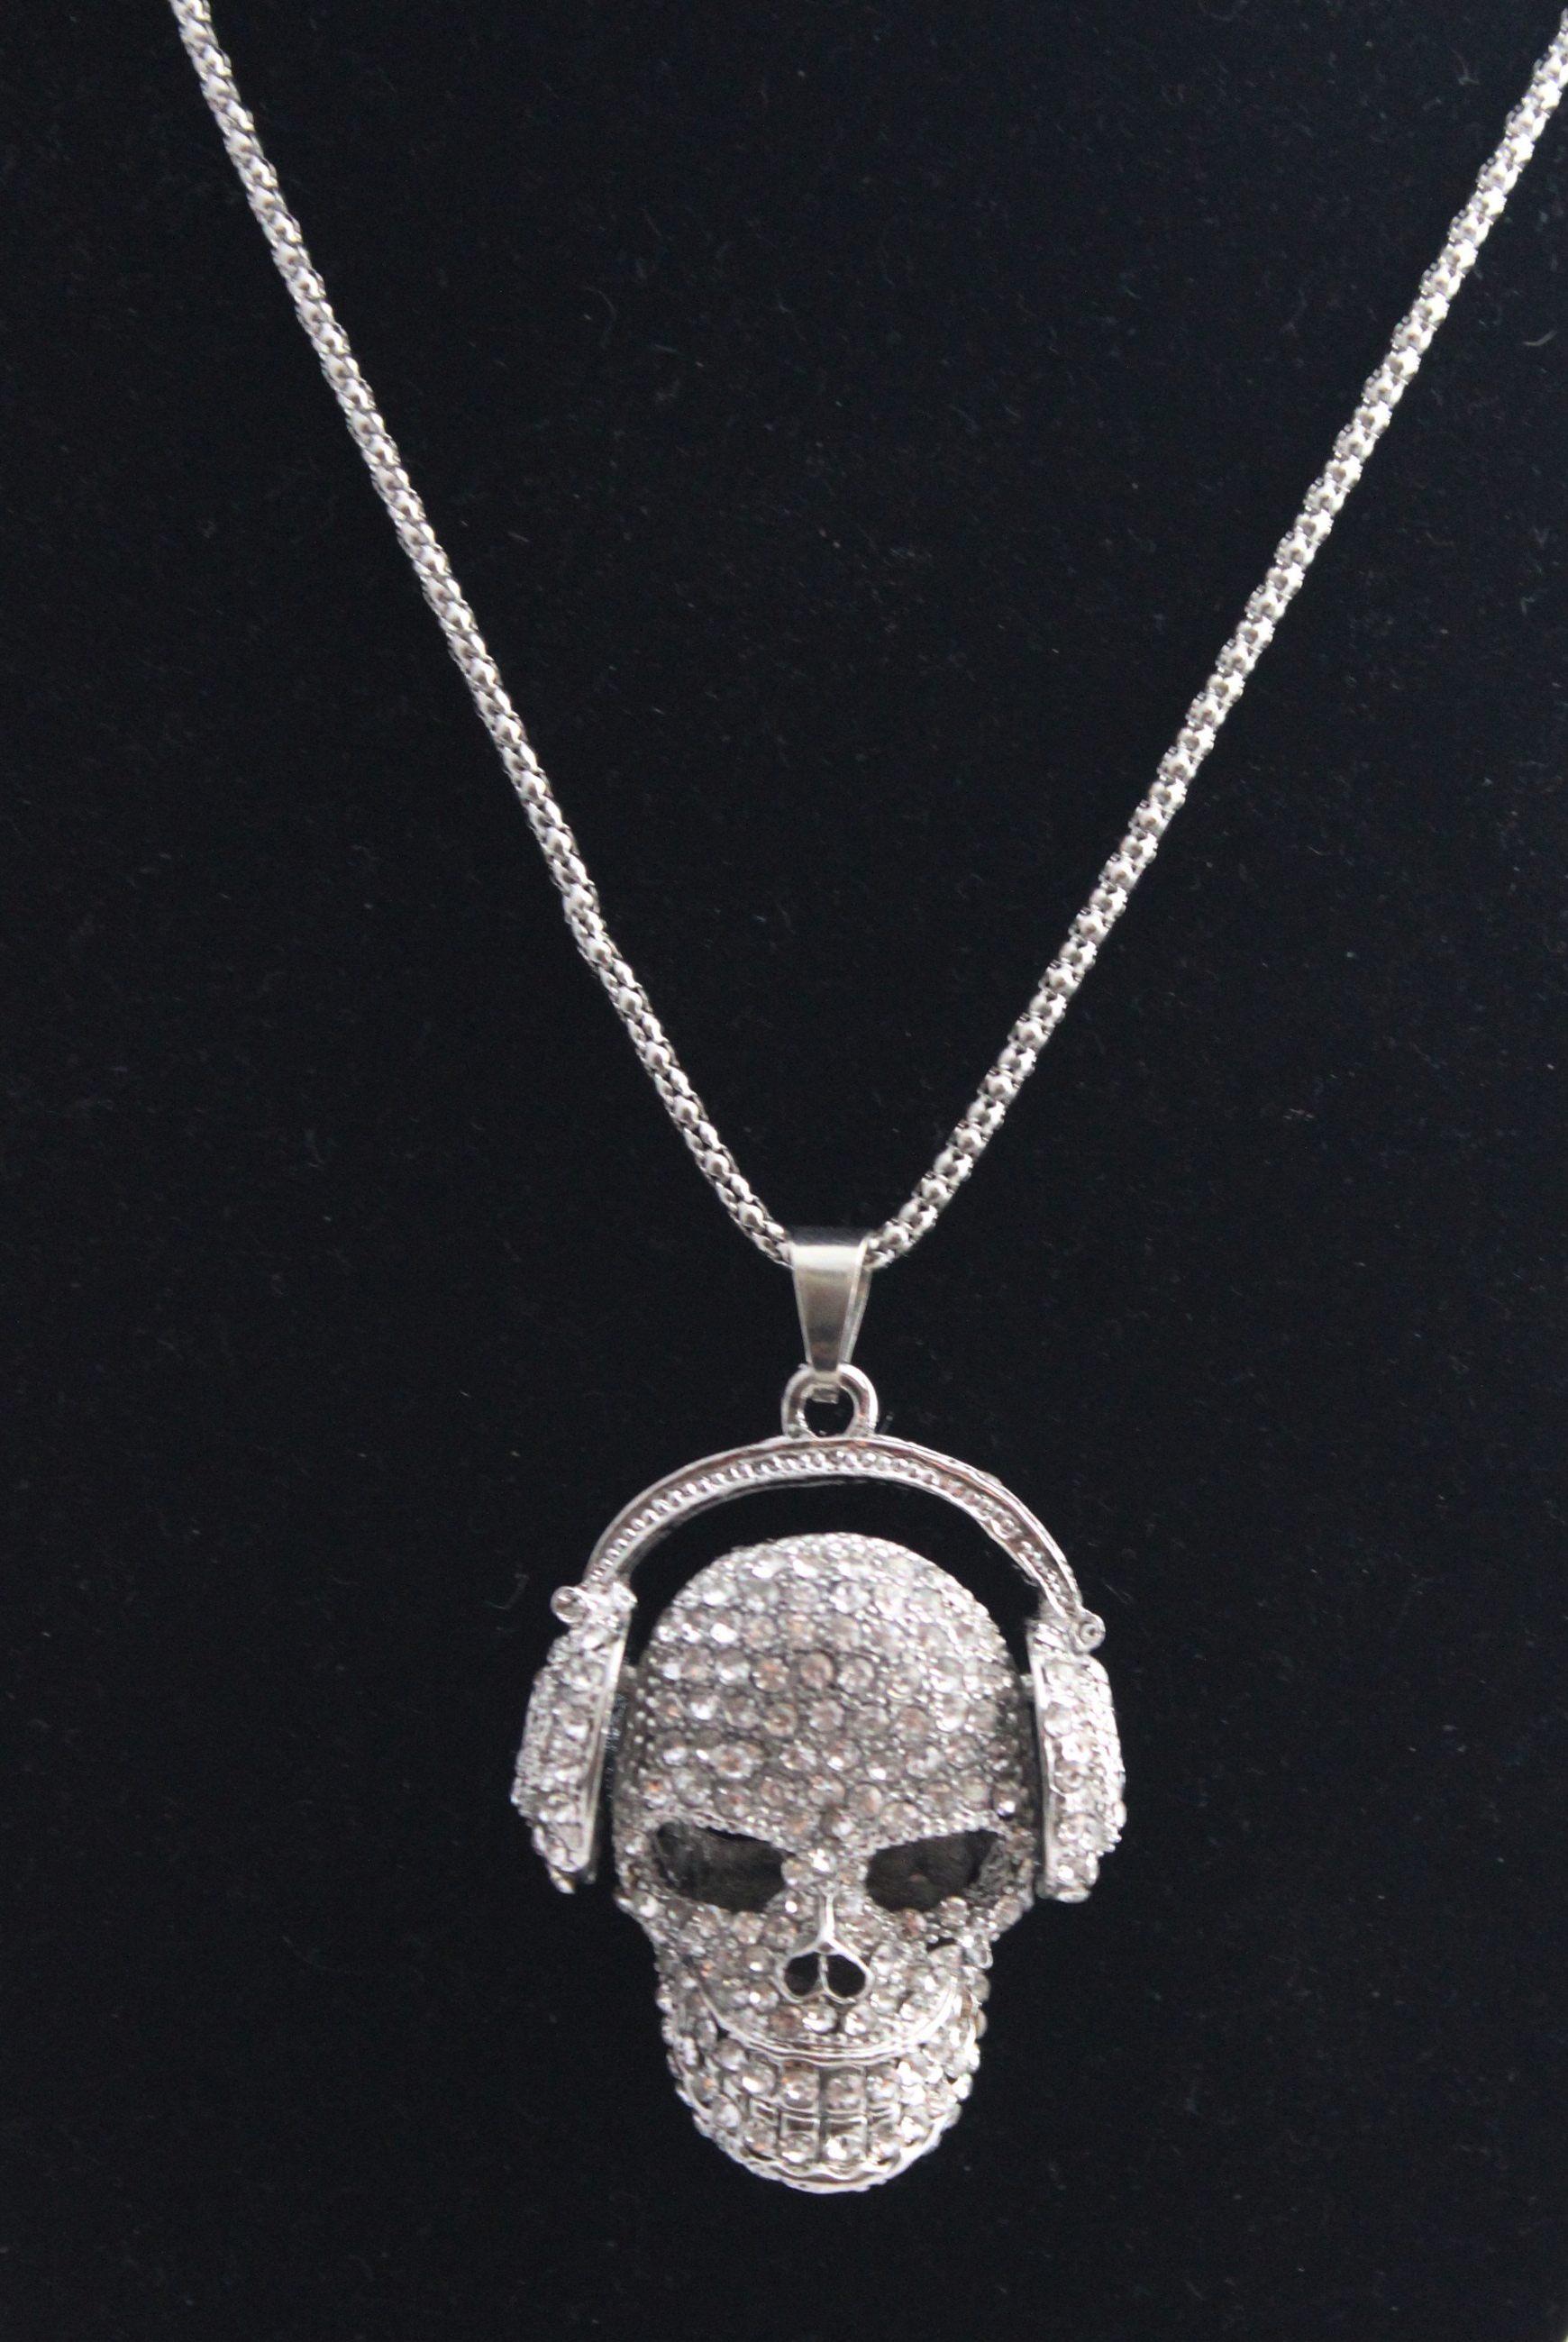 Gothic Vintage Punk Skull With Headphones Necklace